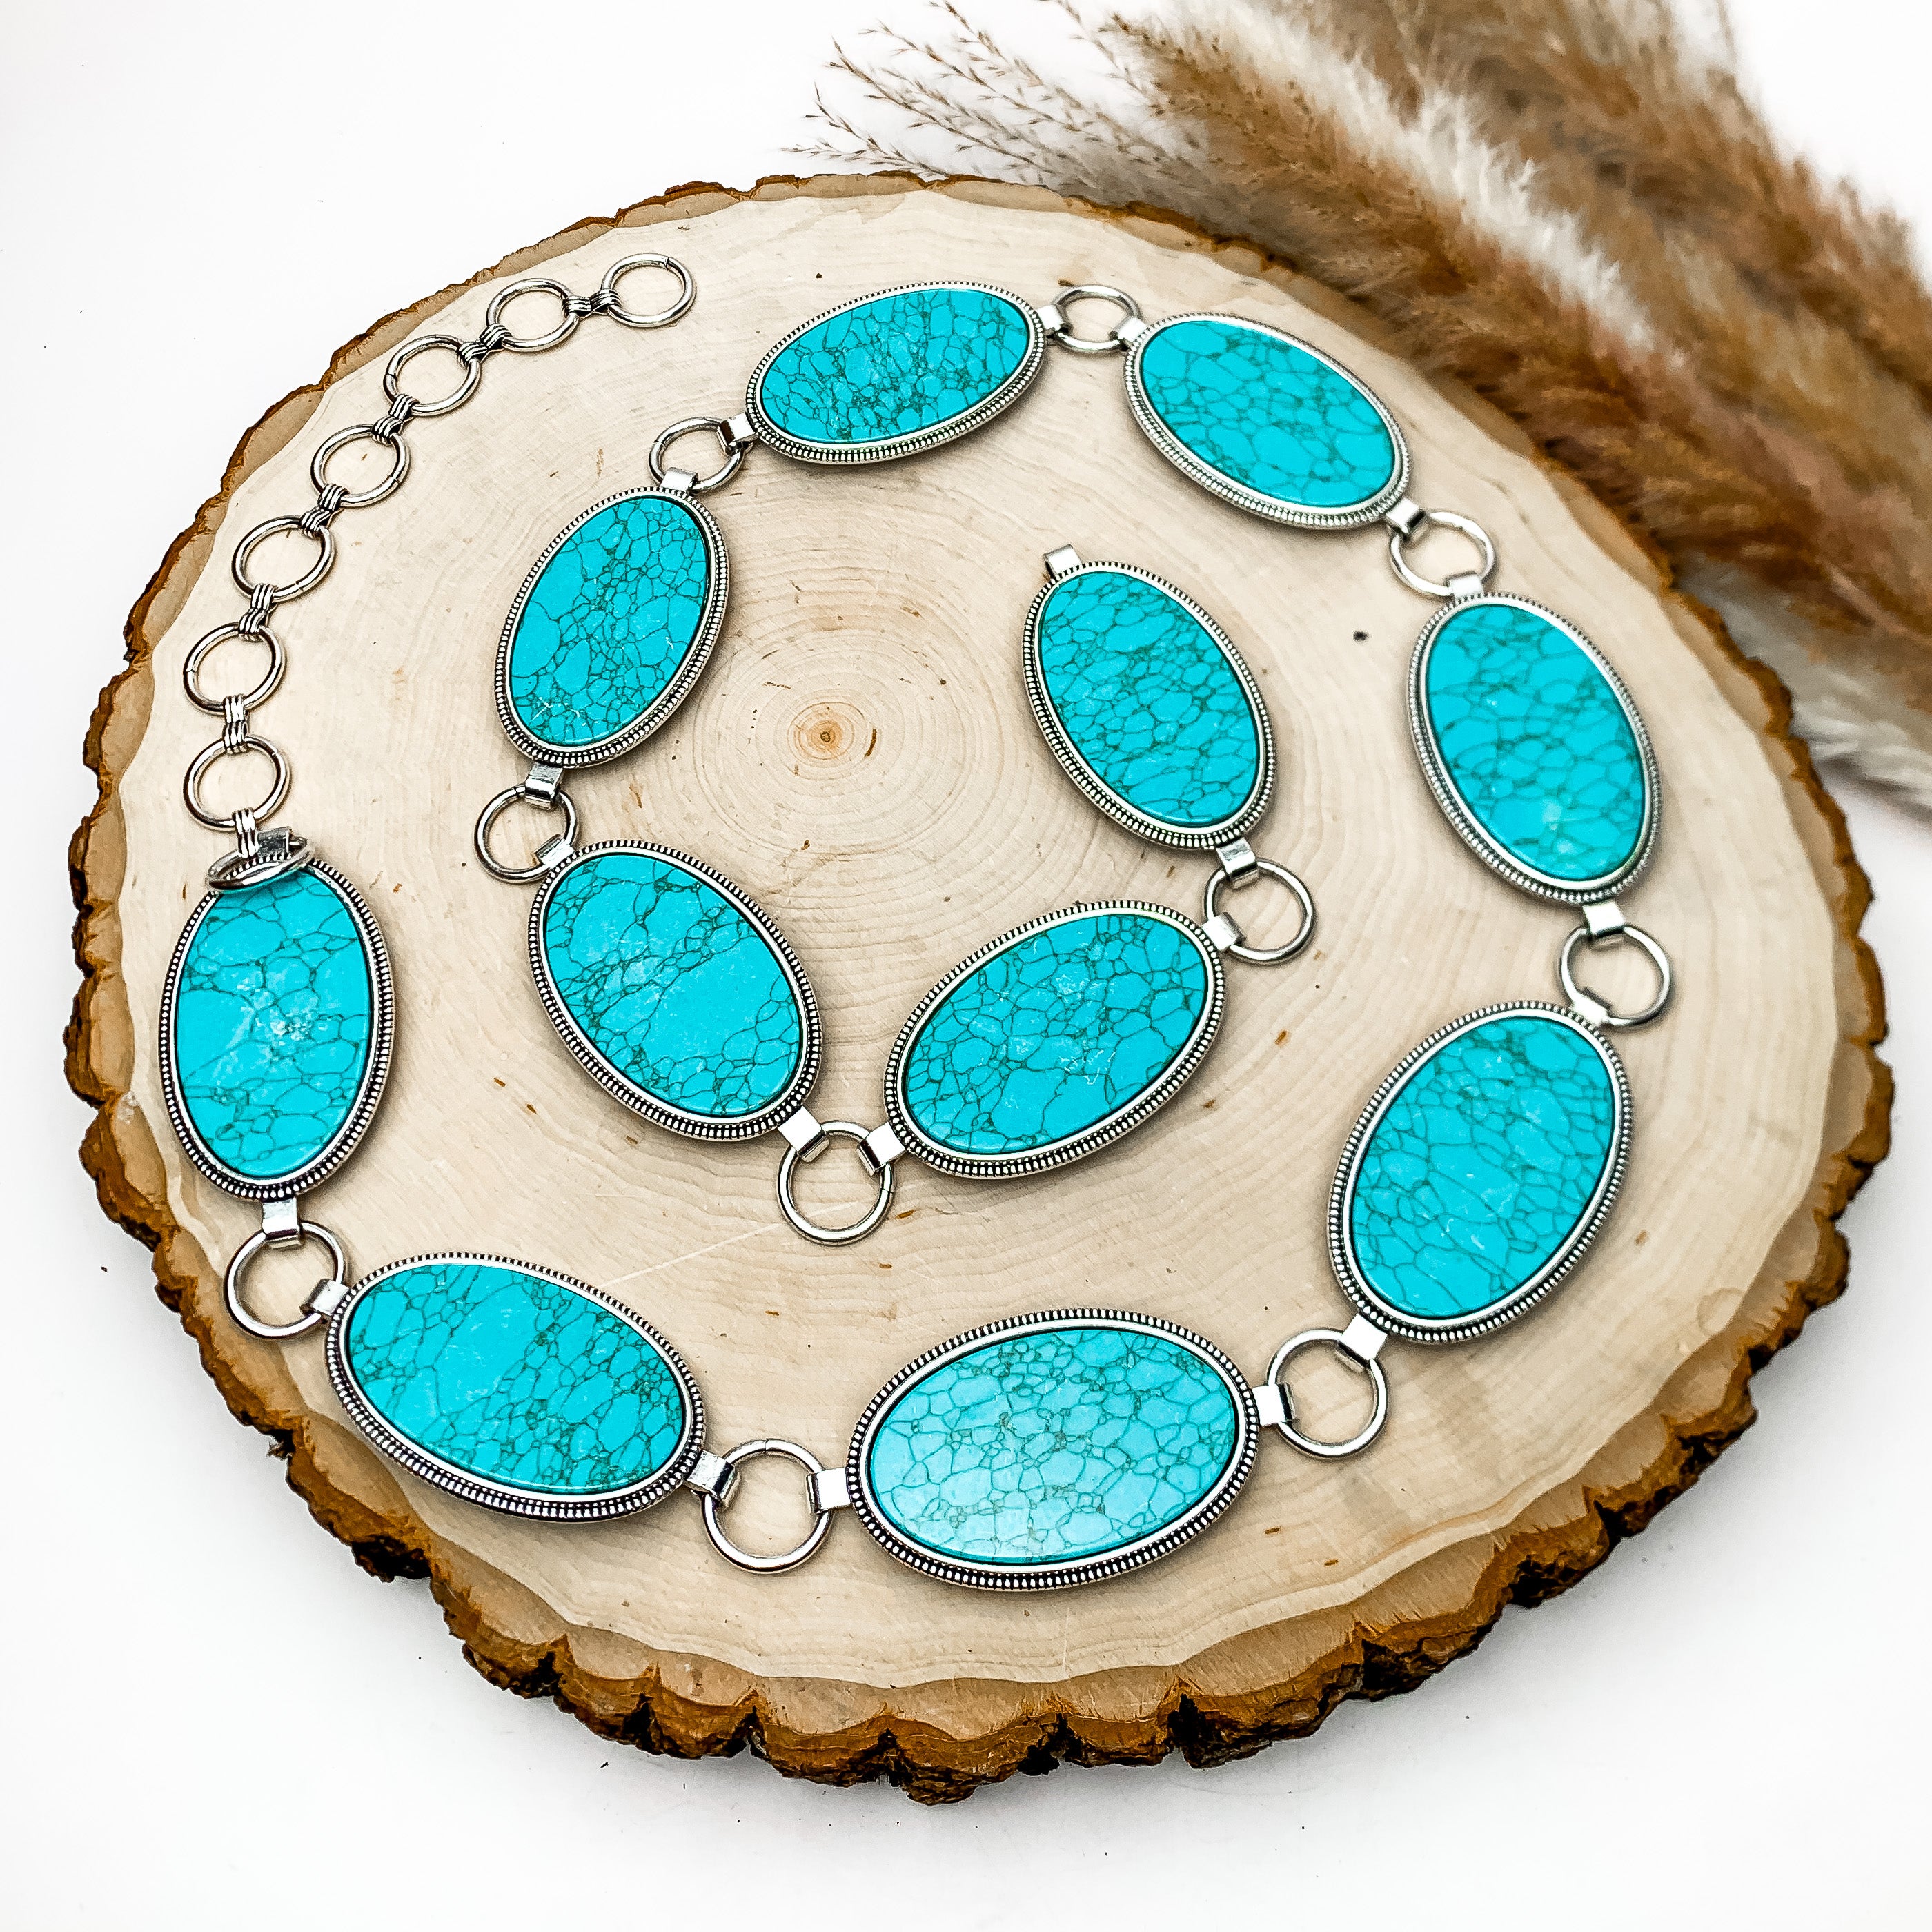 Western Oval Silver Tone adjustable Belt in Turquoise. This belt is laying in a circle formation on a tree stump. The background of the photo is white.